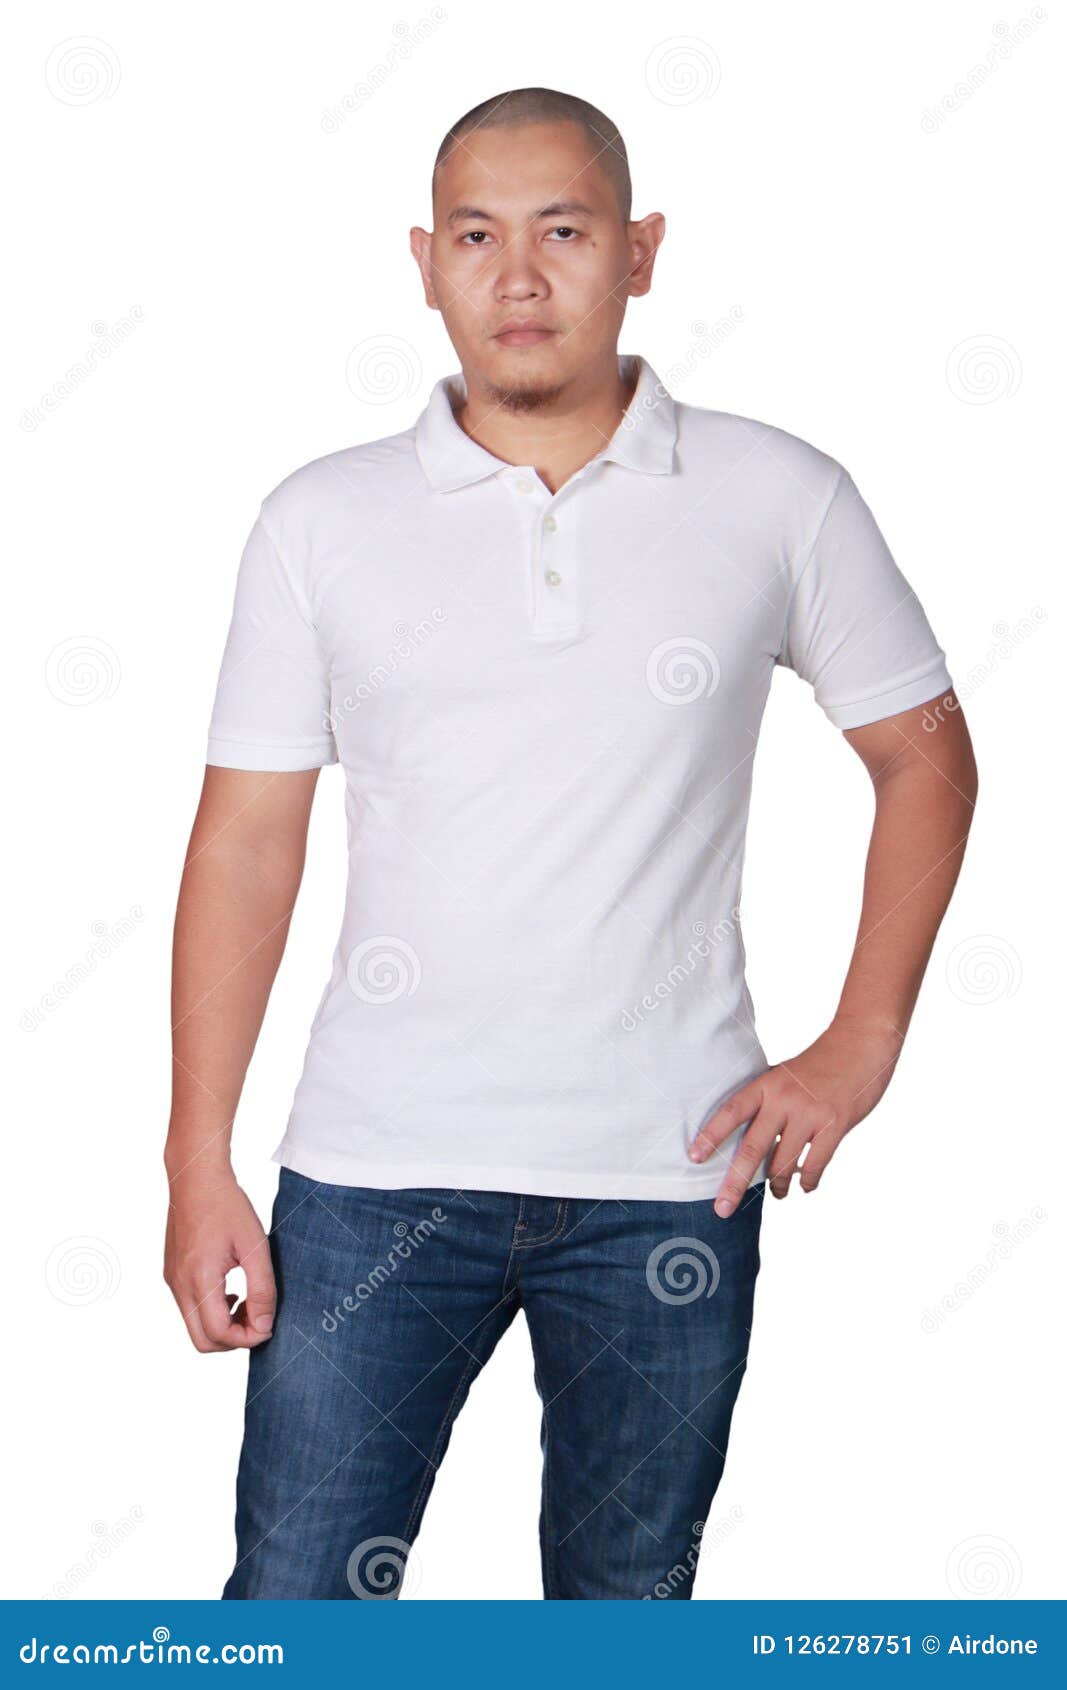 Download Polo Shirt Template Mock Up Stock Image - Image of jeans, presentation: 126278751